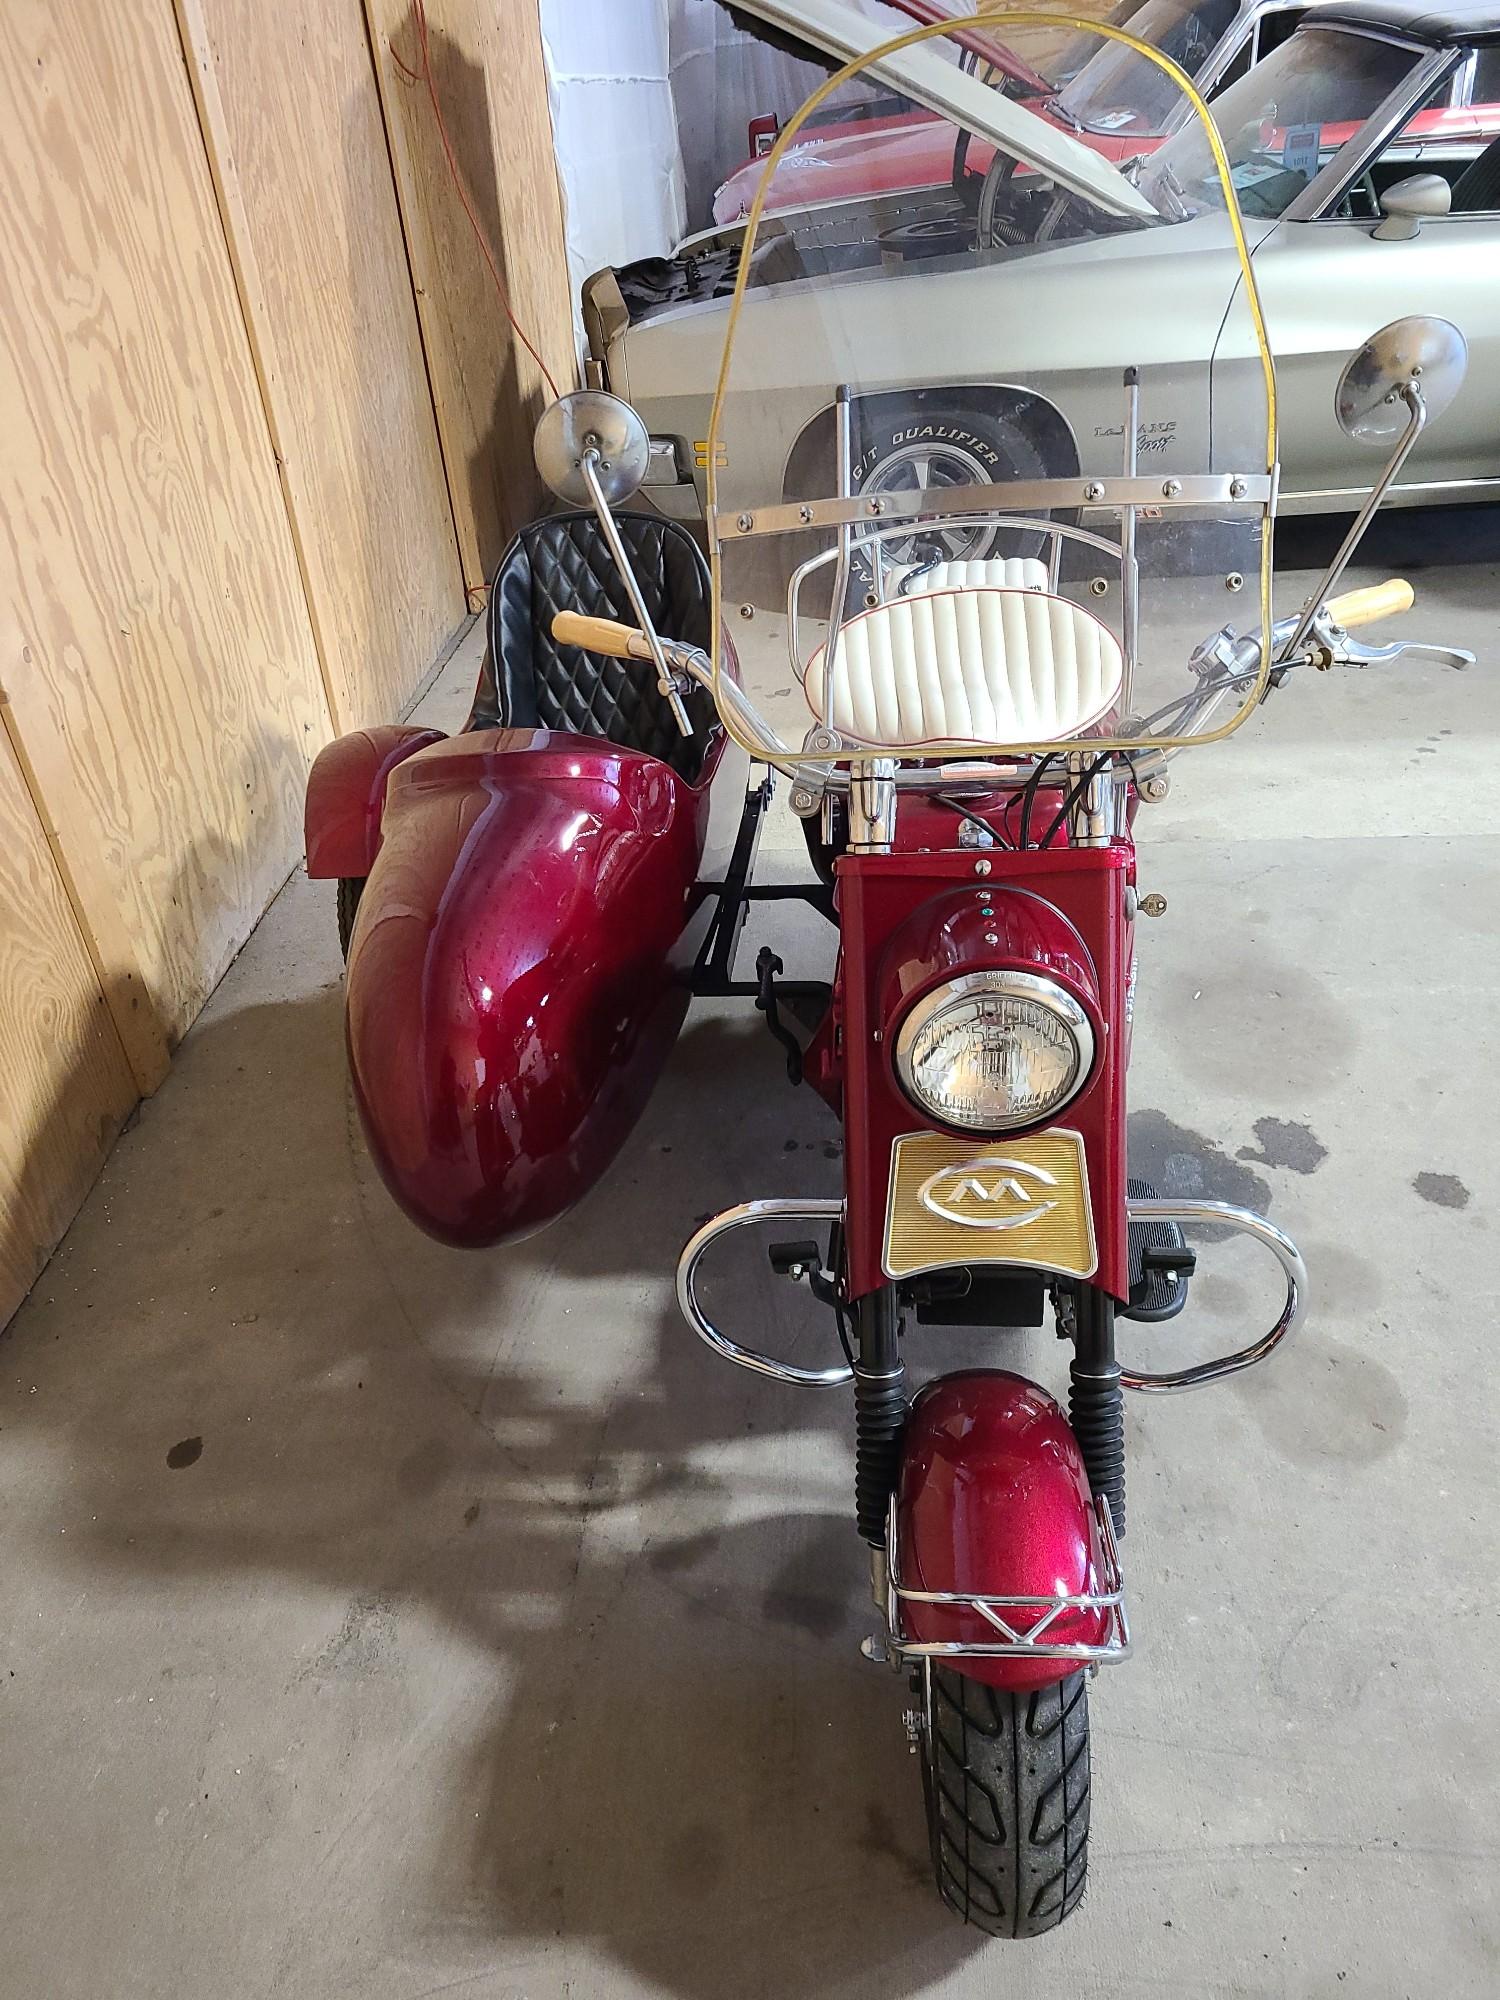 1963 Cushman Scooter With Sidecar